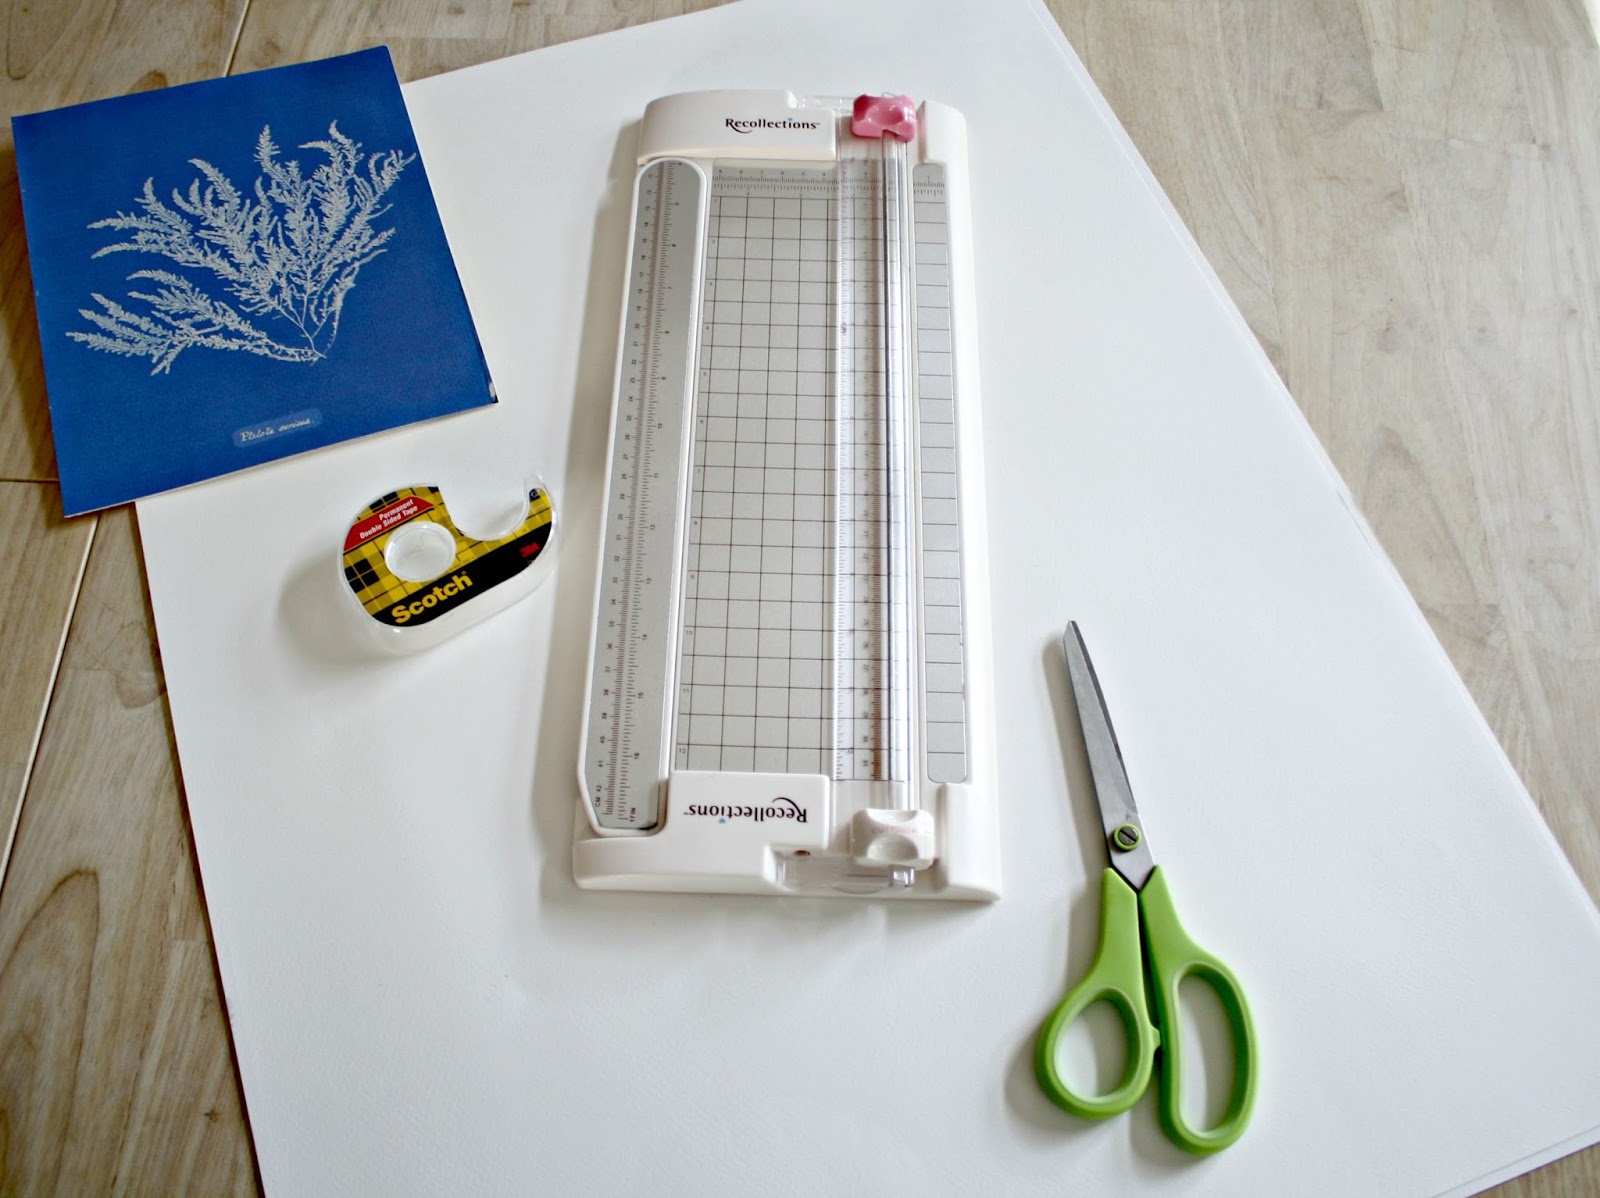 HOW TO USE A CUTTING MAT CUT POSTER BOARD EASILY 